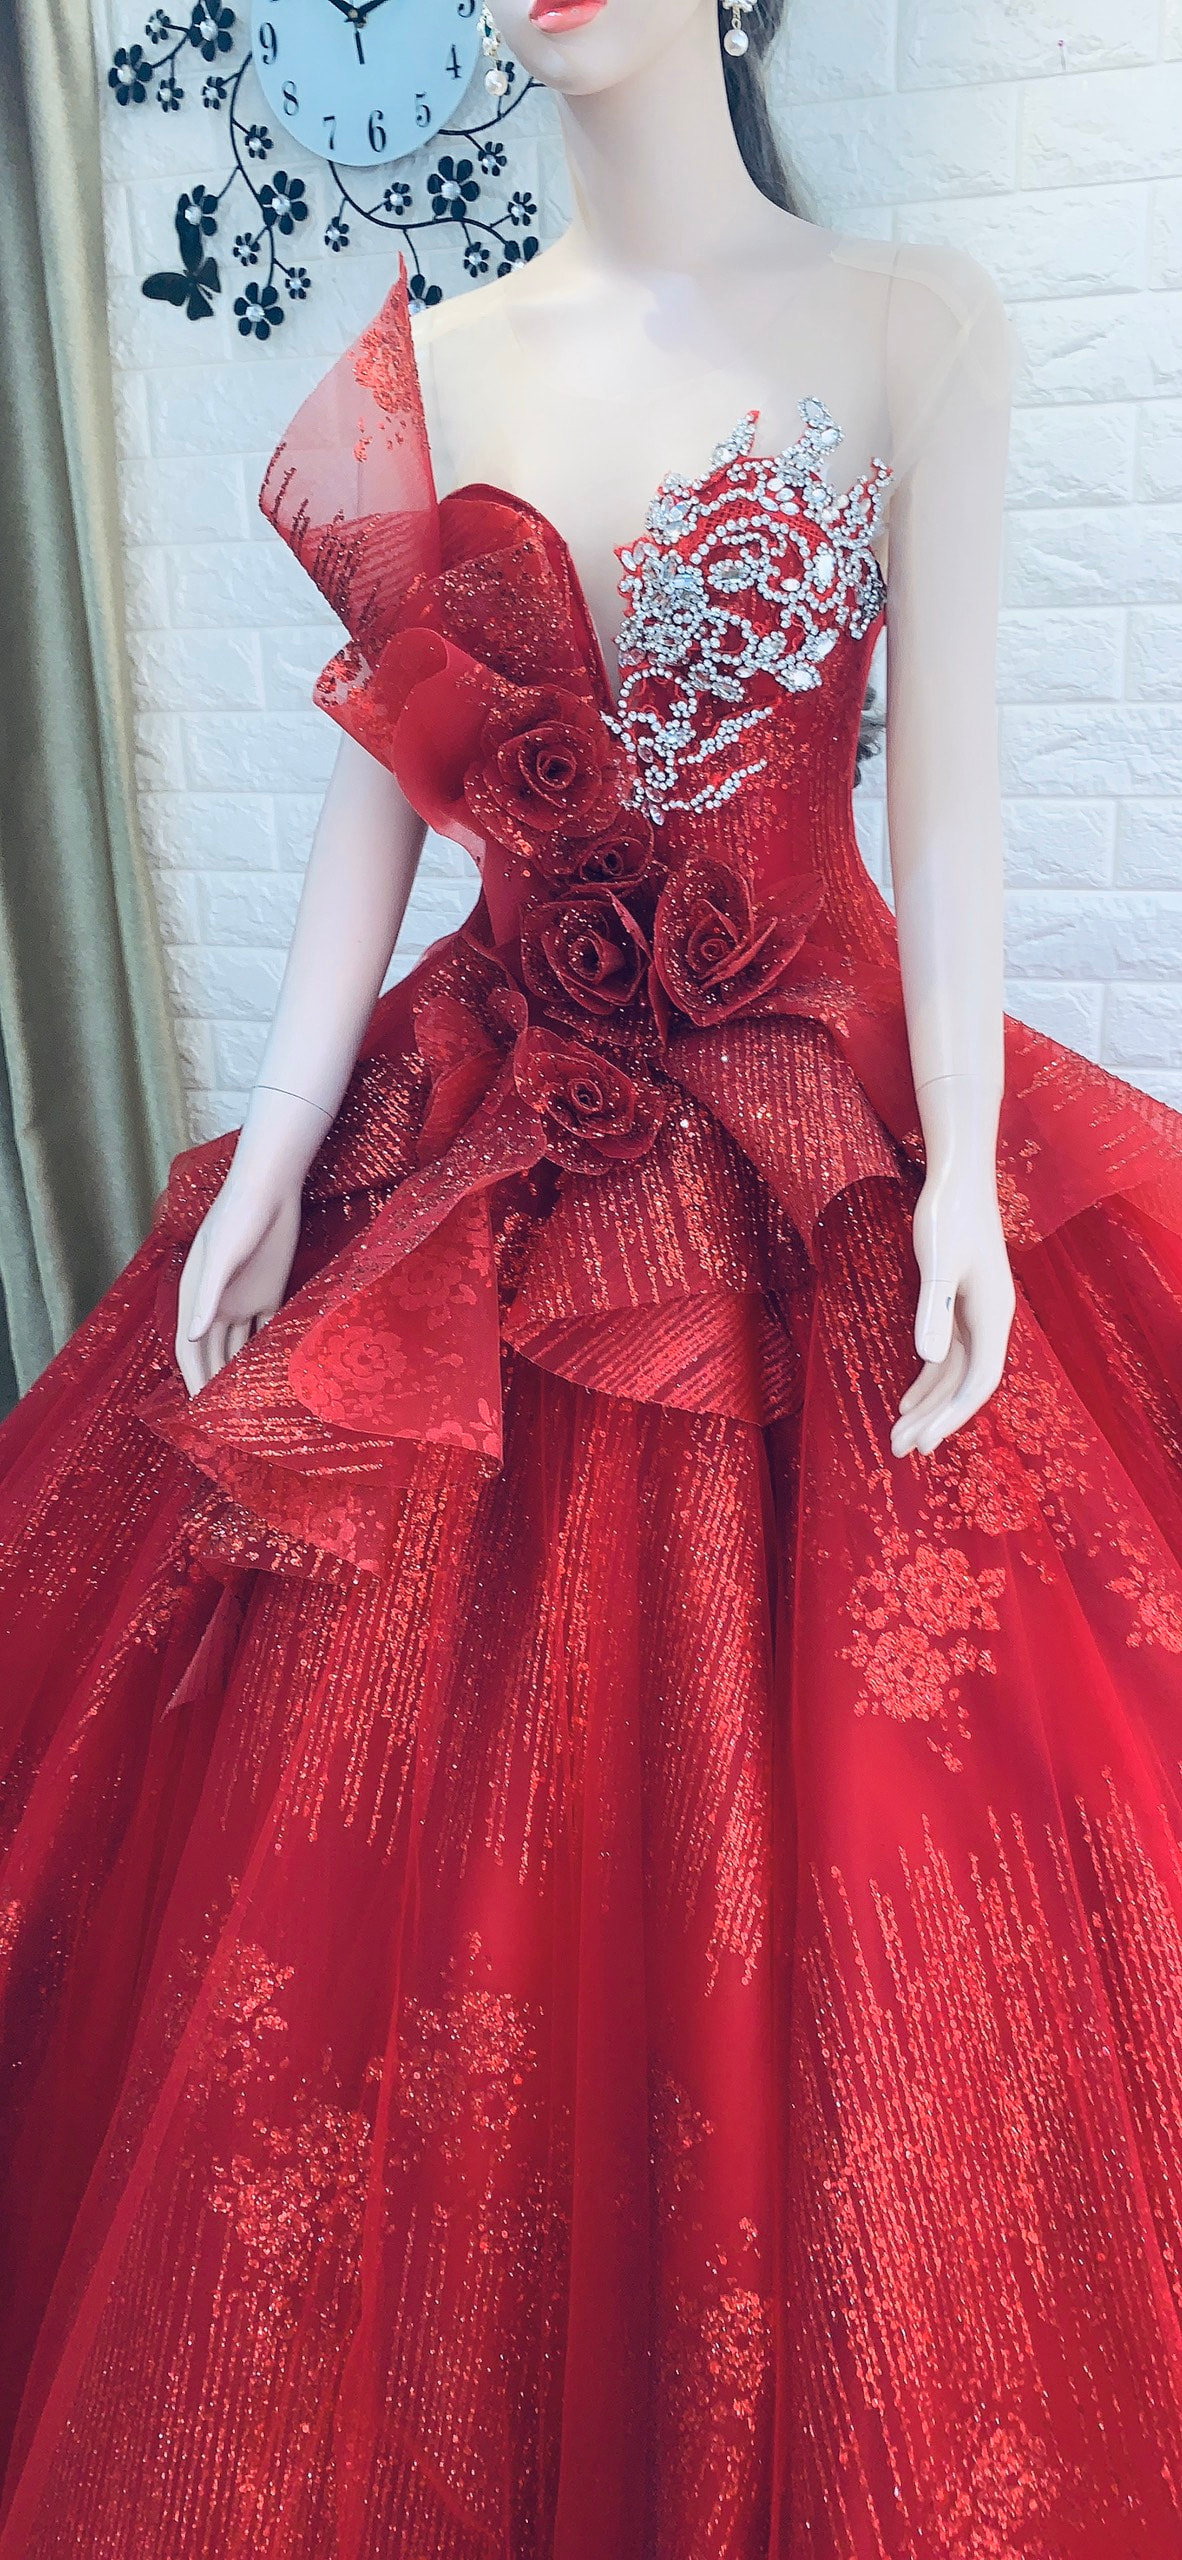 Ball Gown Red Prom Dress With Beads Off the Shoulder Floor-Length Lace  #sweet16ballgowns | Red ball gowns, Sweet 16 dresses, Red quinceanera  dresses